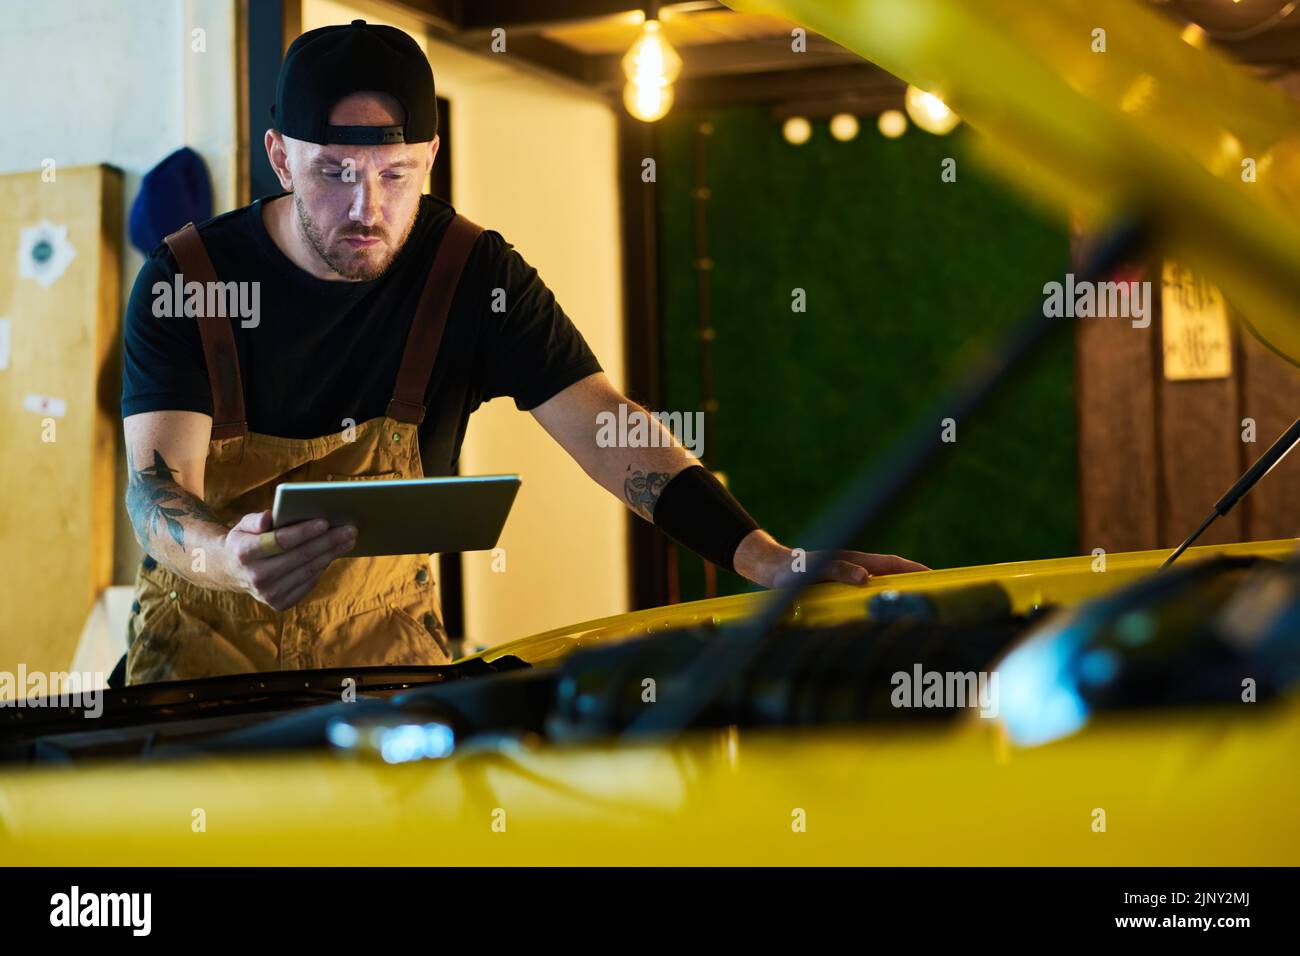 Young worker of maintenance service looking at screen of tablet while bending over engine of car and carrying out technical checkup Stock Photo